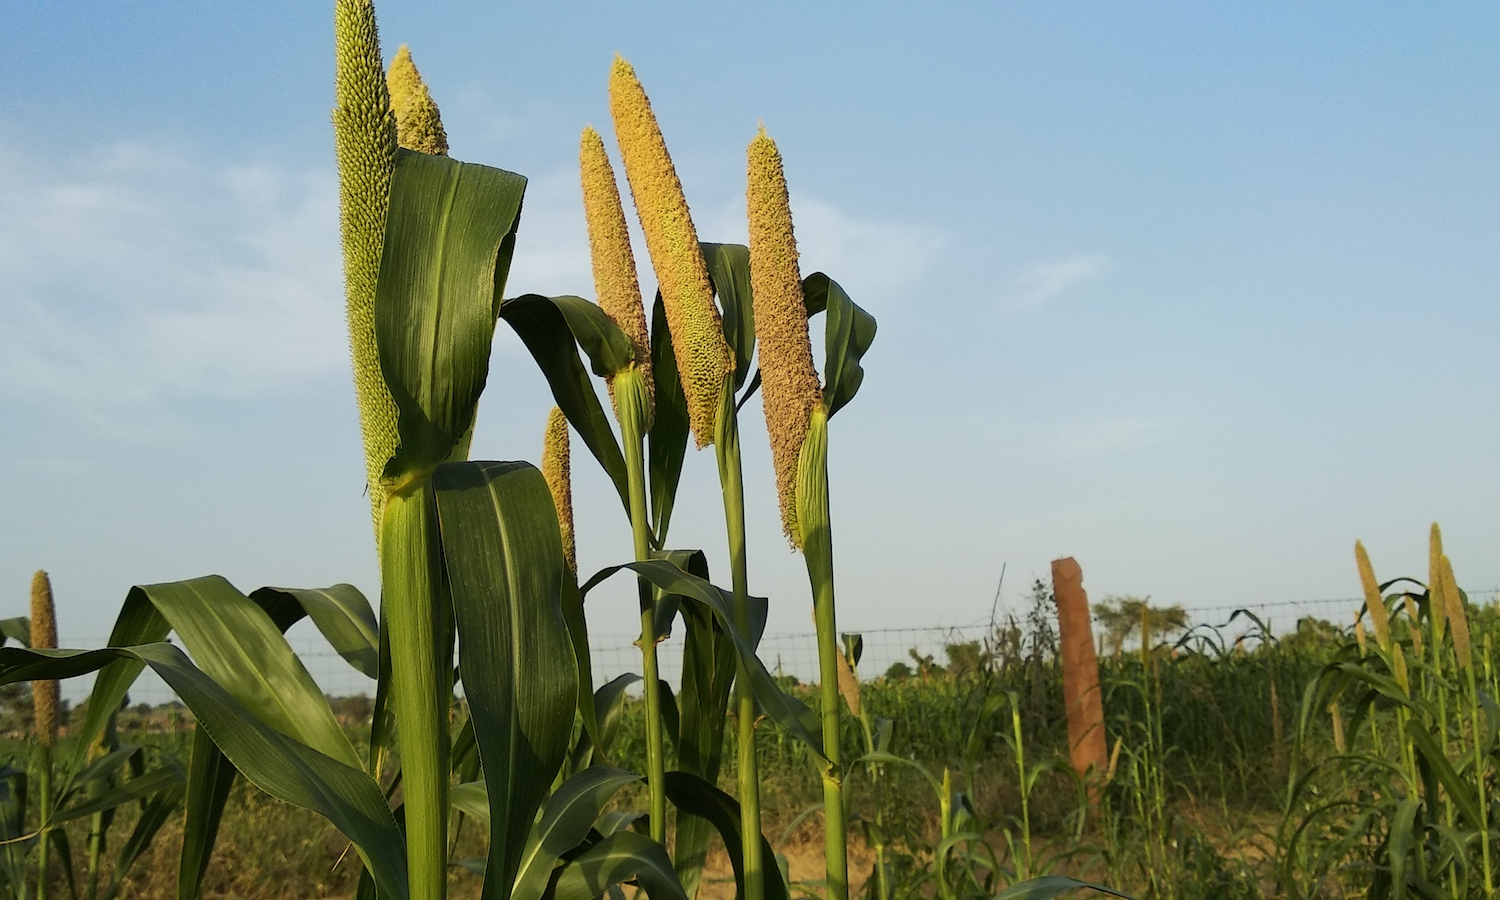 The International Center for Biosaline Agriculture is investing in crops like millet that can grow in what Alzaabi calls marginal environments